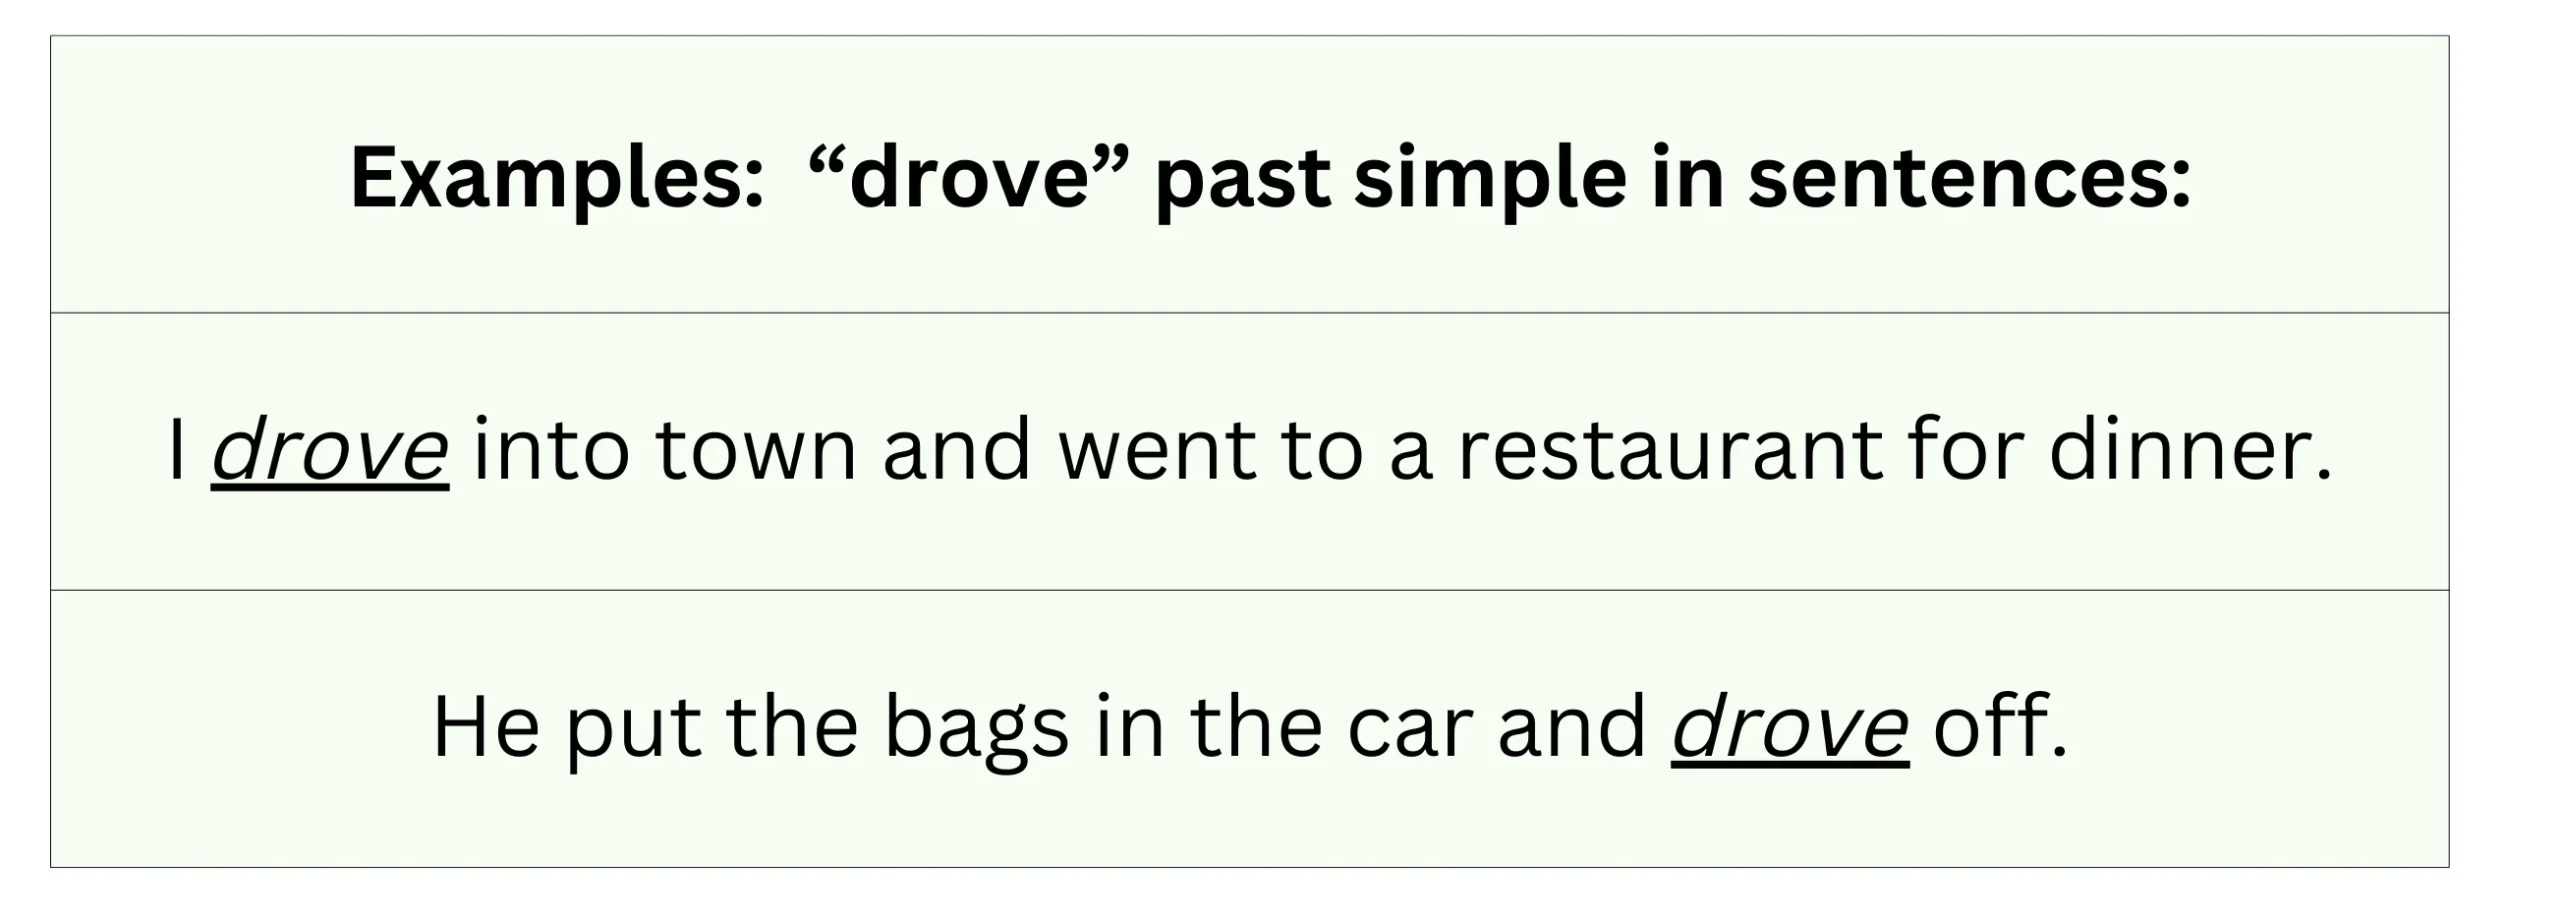 Examples of "drove" in the past tense.